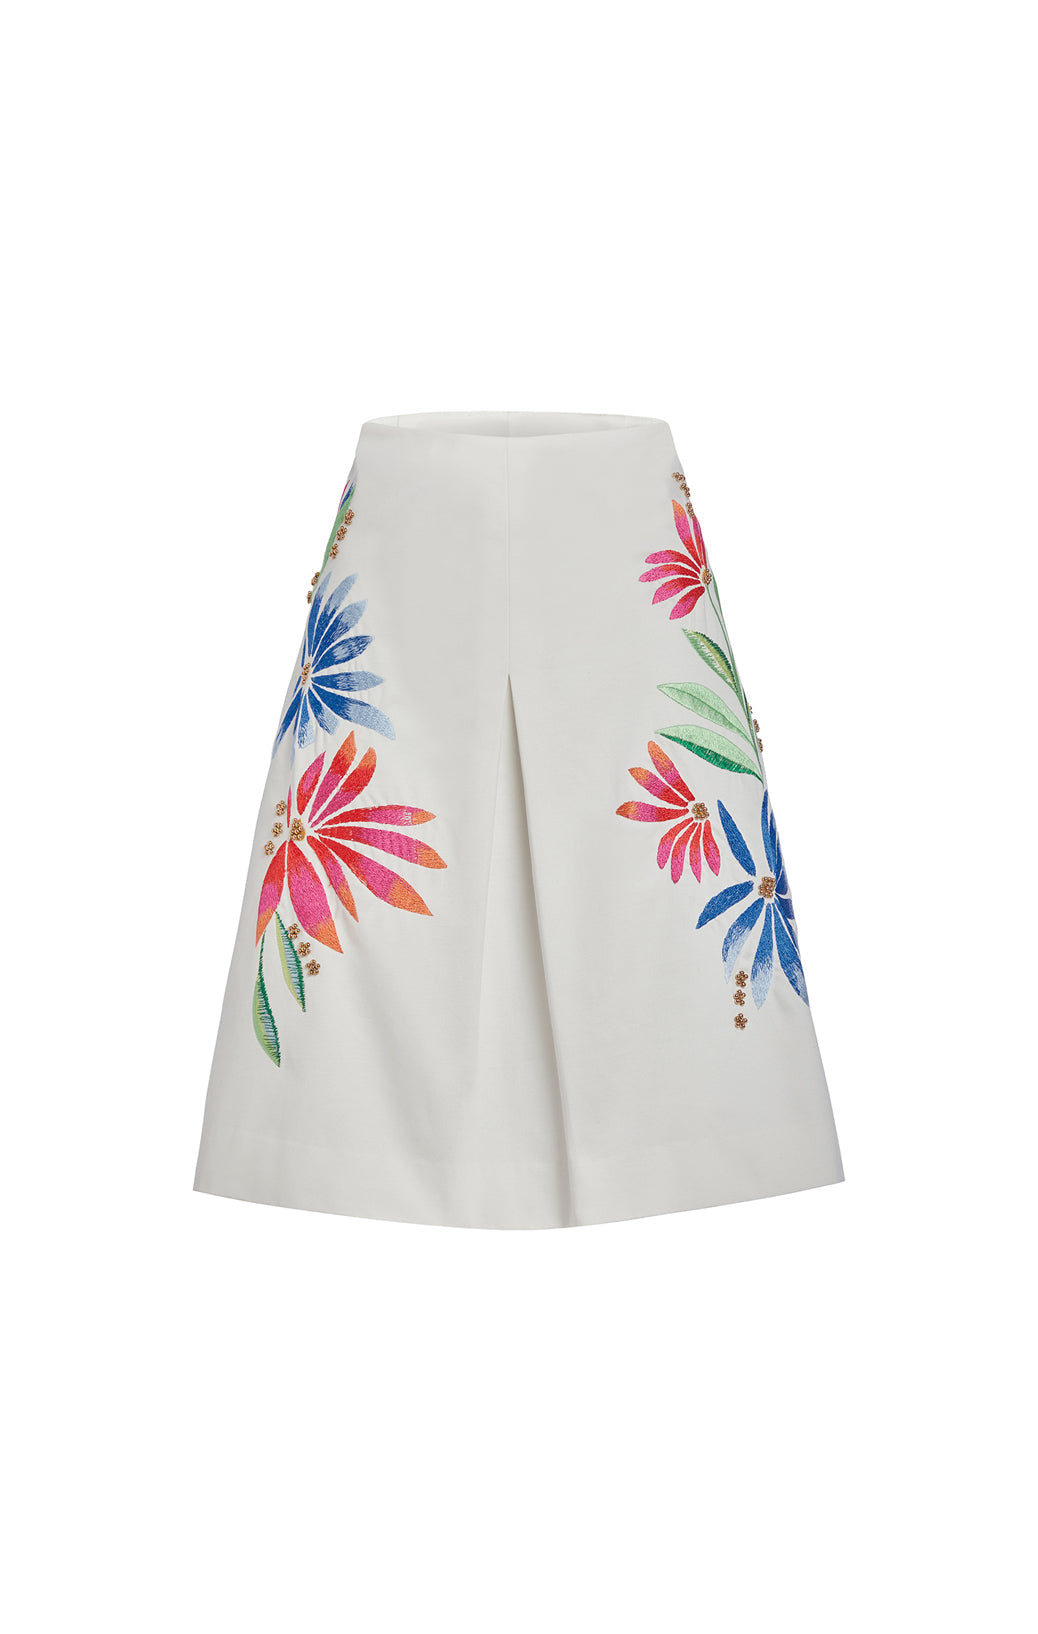 Tanager - Italian Stretch Linen Twill Skirt - Product Image